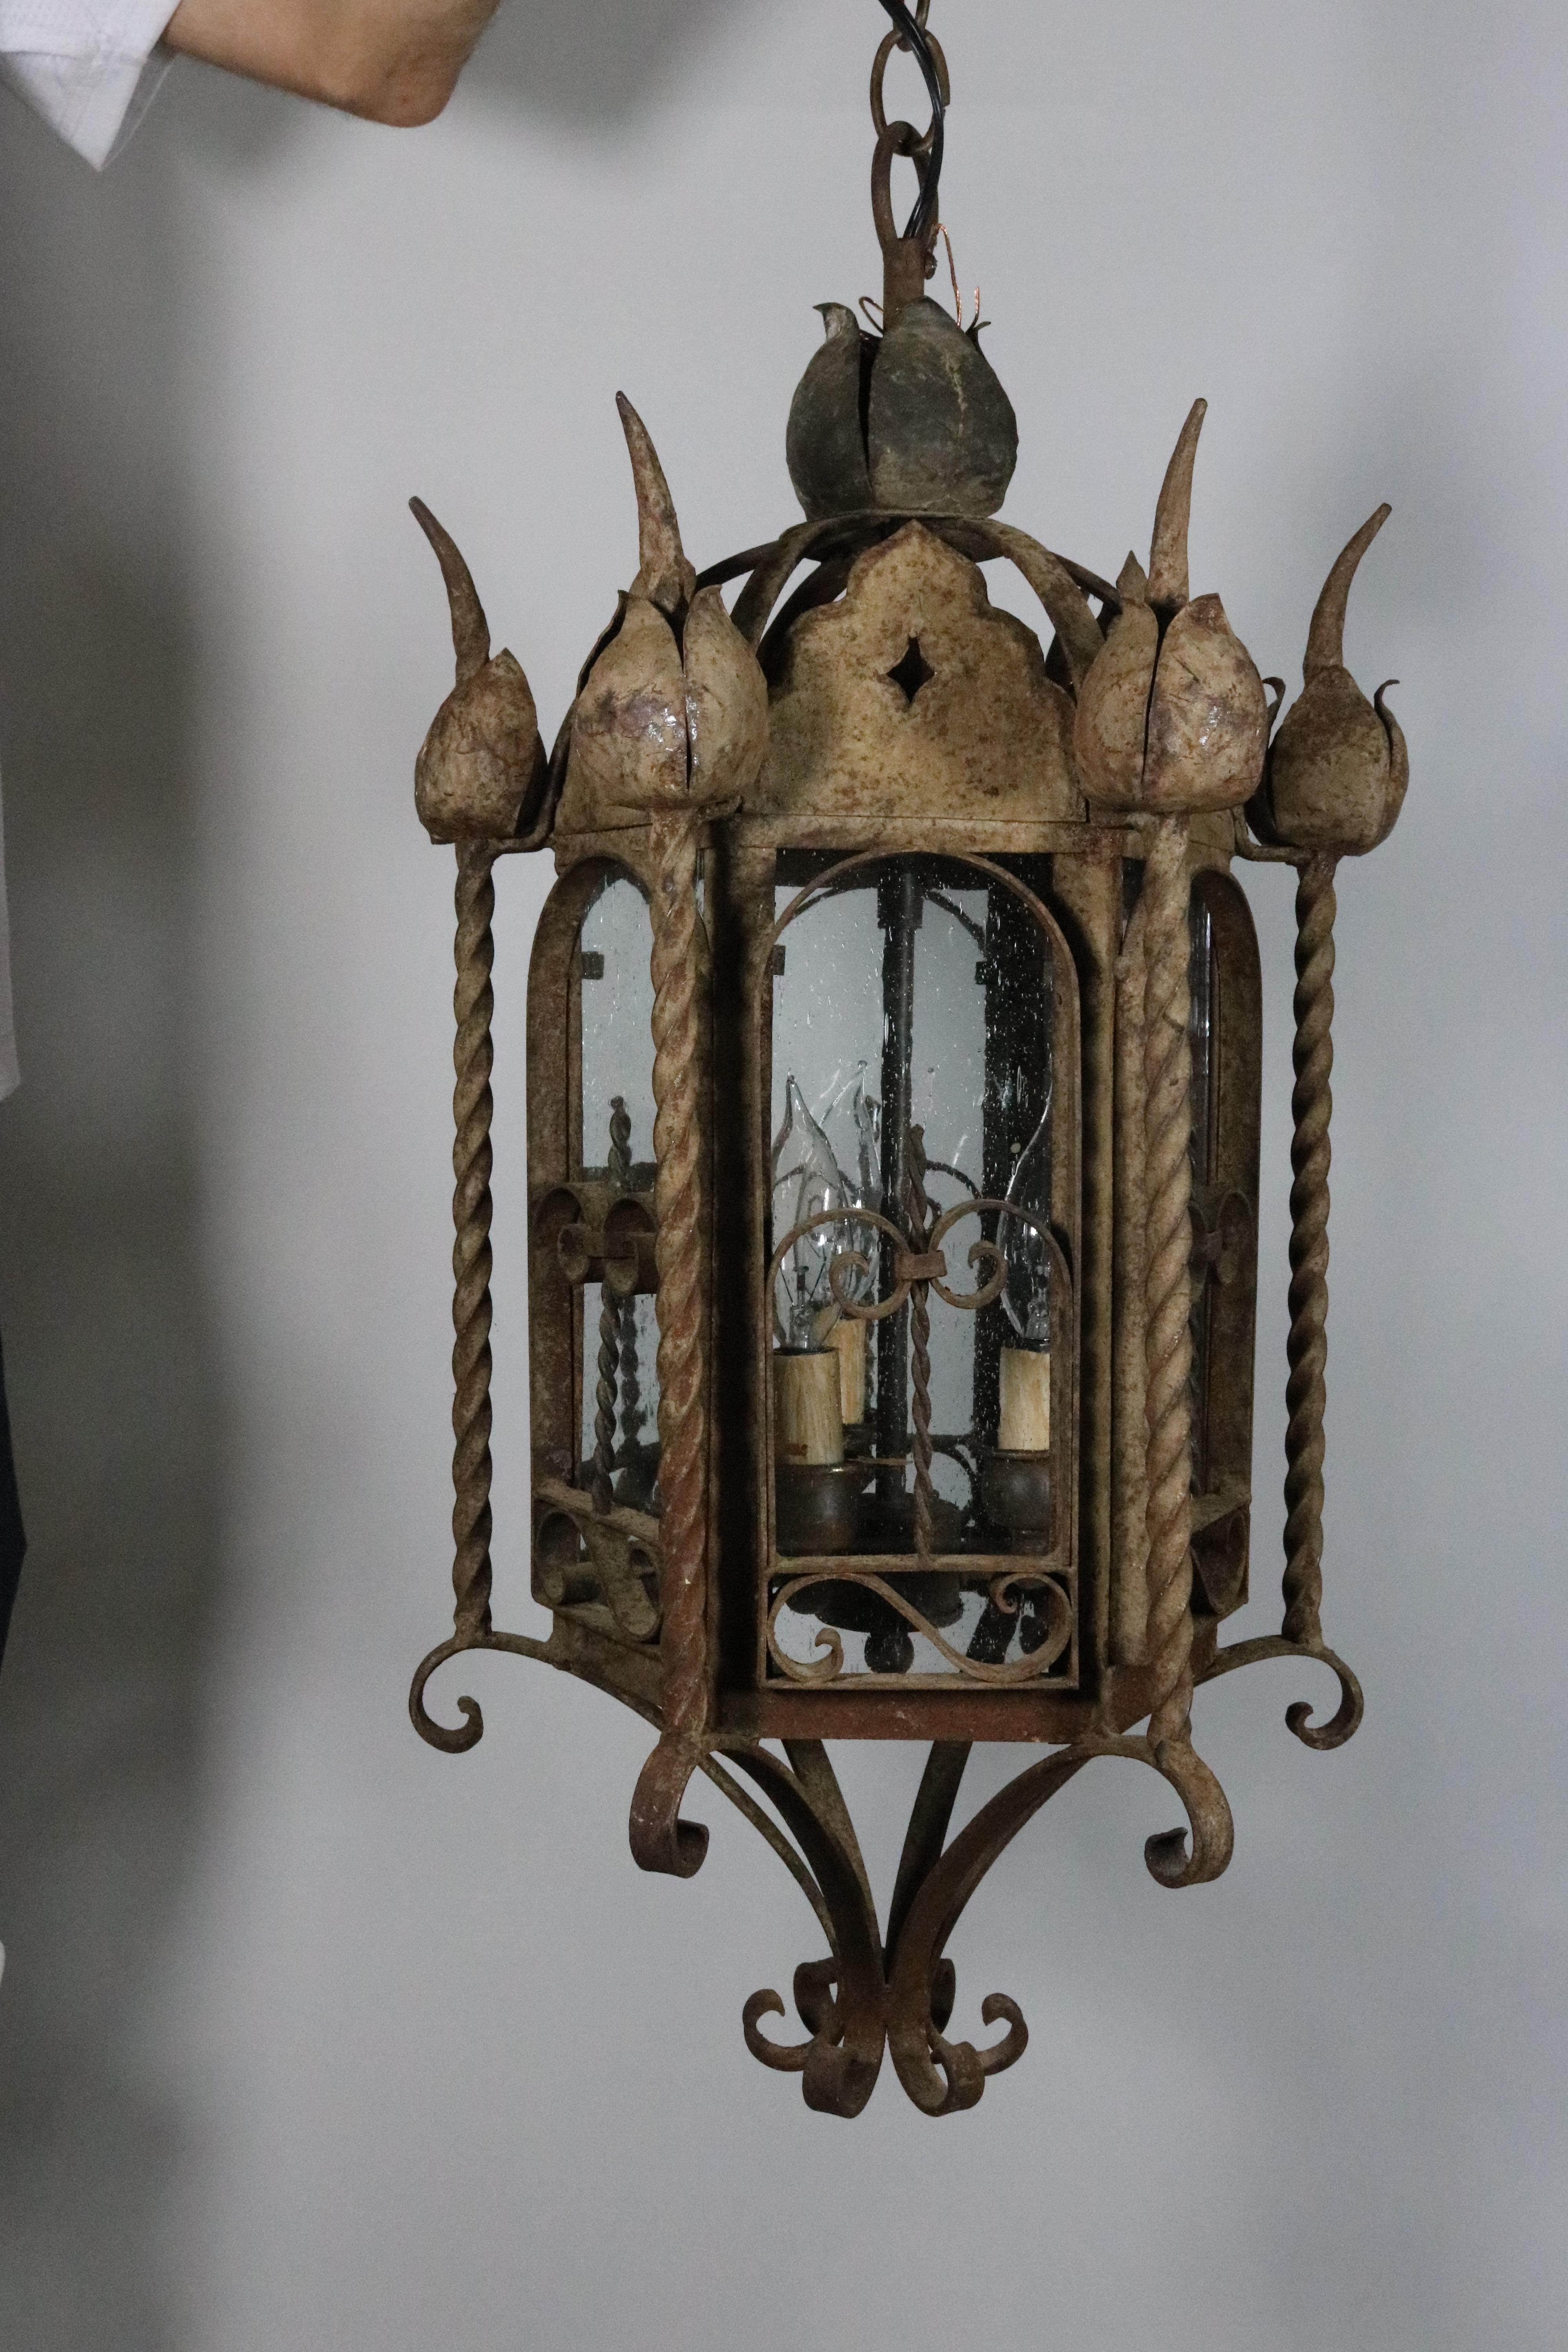 Palm Beach Mizner Pair Seed Glass Iron Lanterns-Rusticated Finish, 1900s In Good Condition For Sale In West Palm Beach, FL